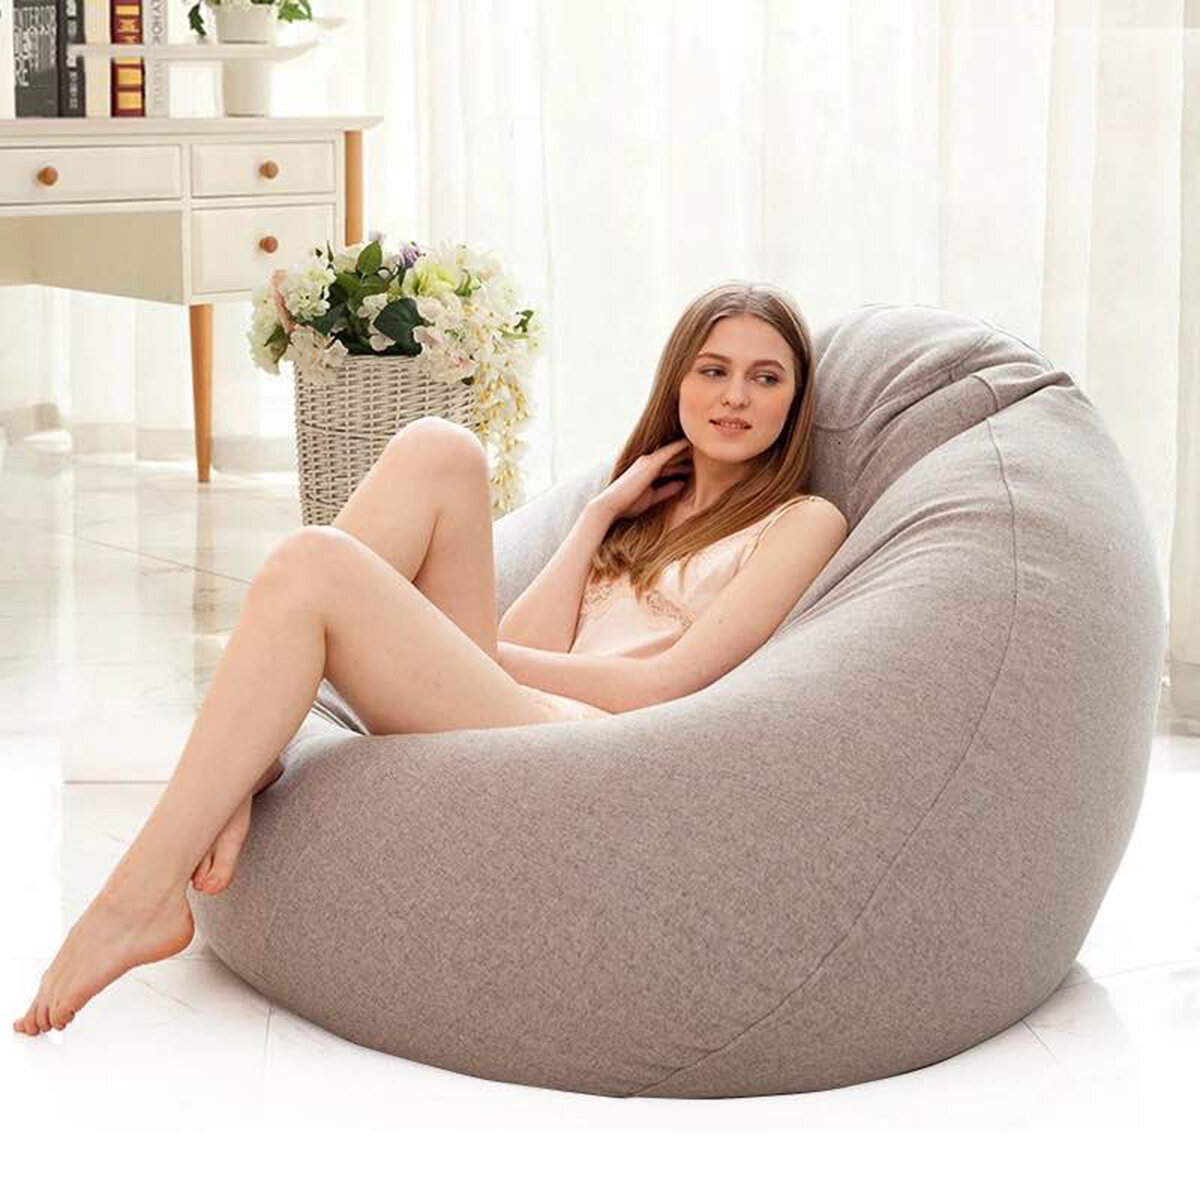 

Lazy Bean Sofas Cover Chairs Filler Linen Cloth Lounger Seat Bean Bag Pouf Puff Couch Tatami for Living Room